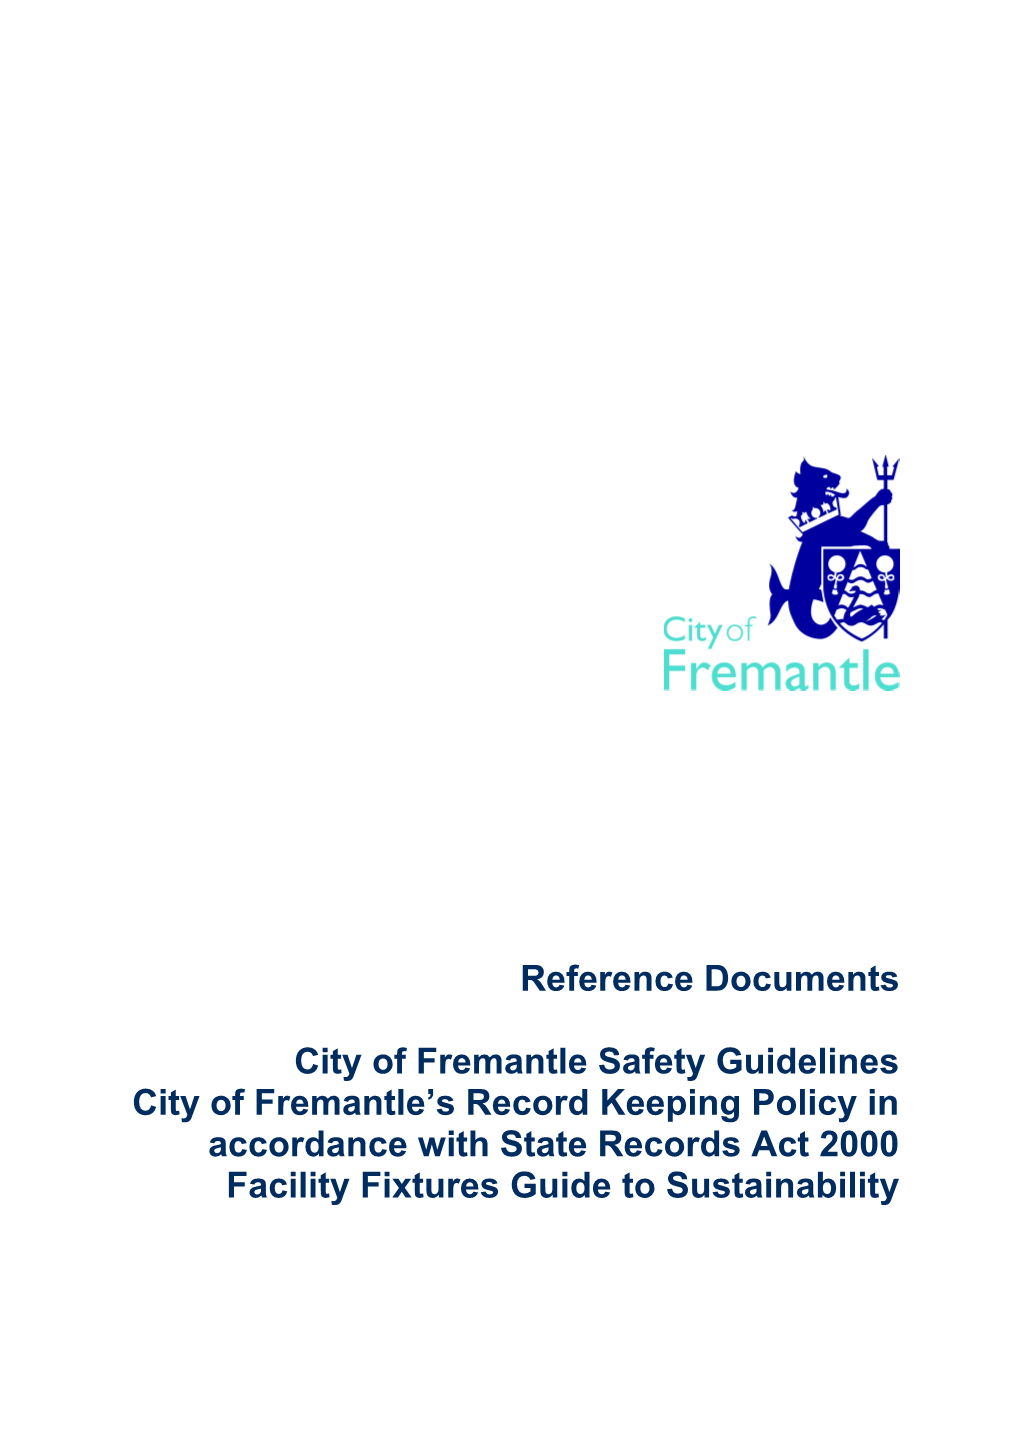 City of Fremantle Safety Guidelines